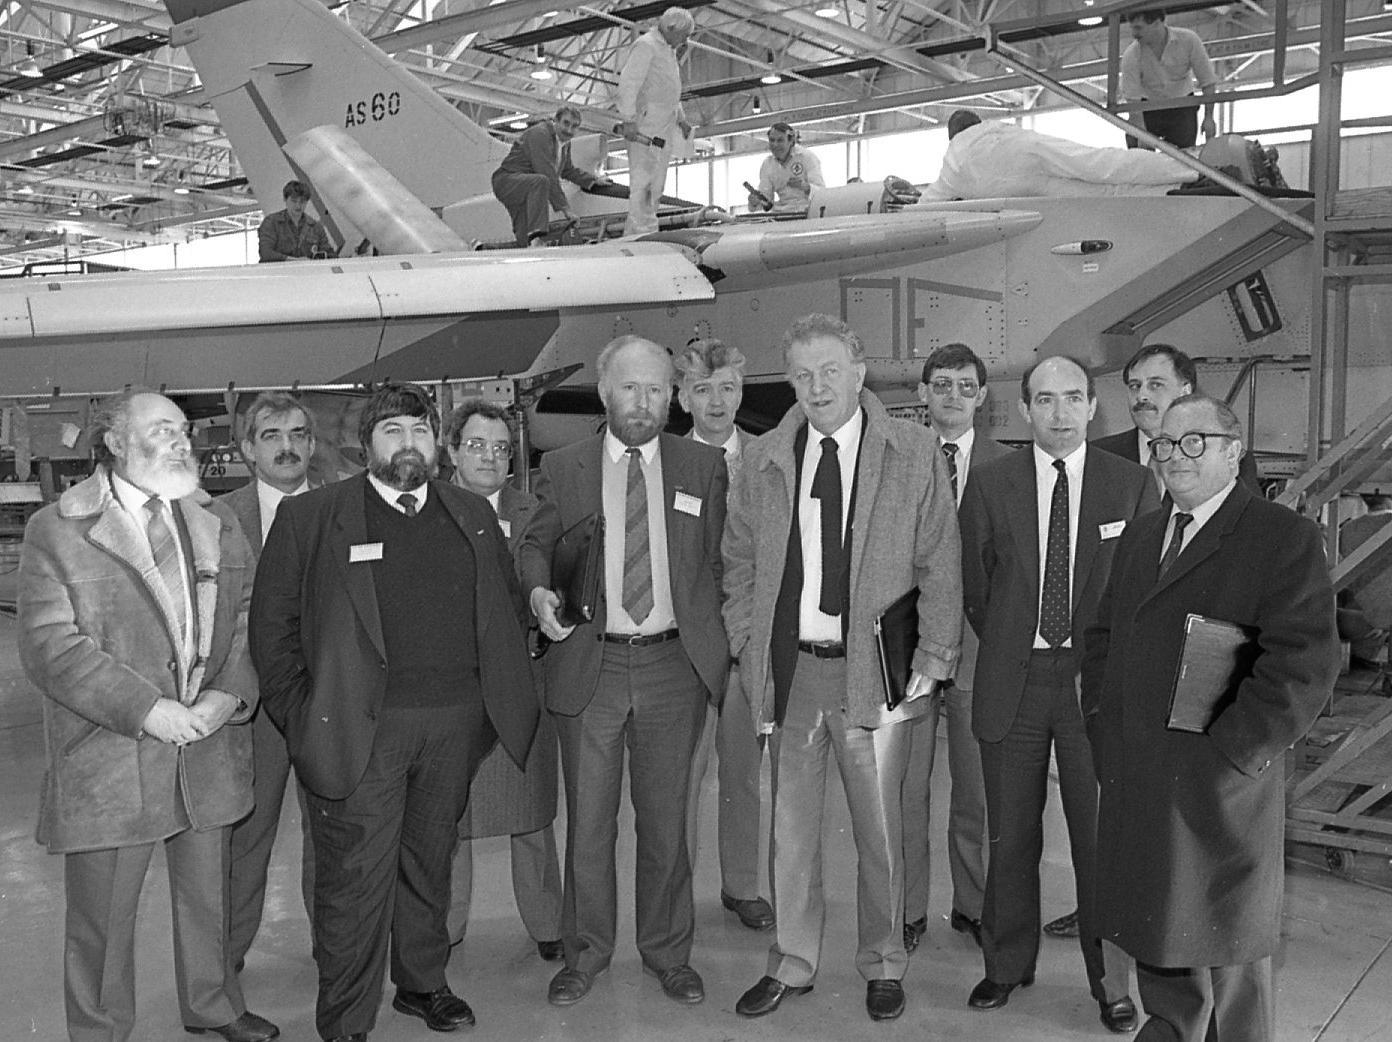 TUC president Clive Jenkins, and general secretary of TASS Ken Gill visited British Aerospace at Warton as part of a nationwide tour to launch the record-breaking new industry and services union - MSF (Manufacturing, Science and Finance. MSF has gone into the Guinness Book of Records as the largest ever trade union amalgamation